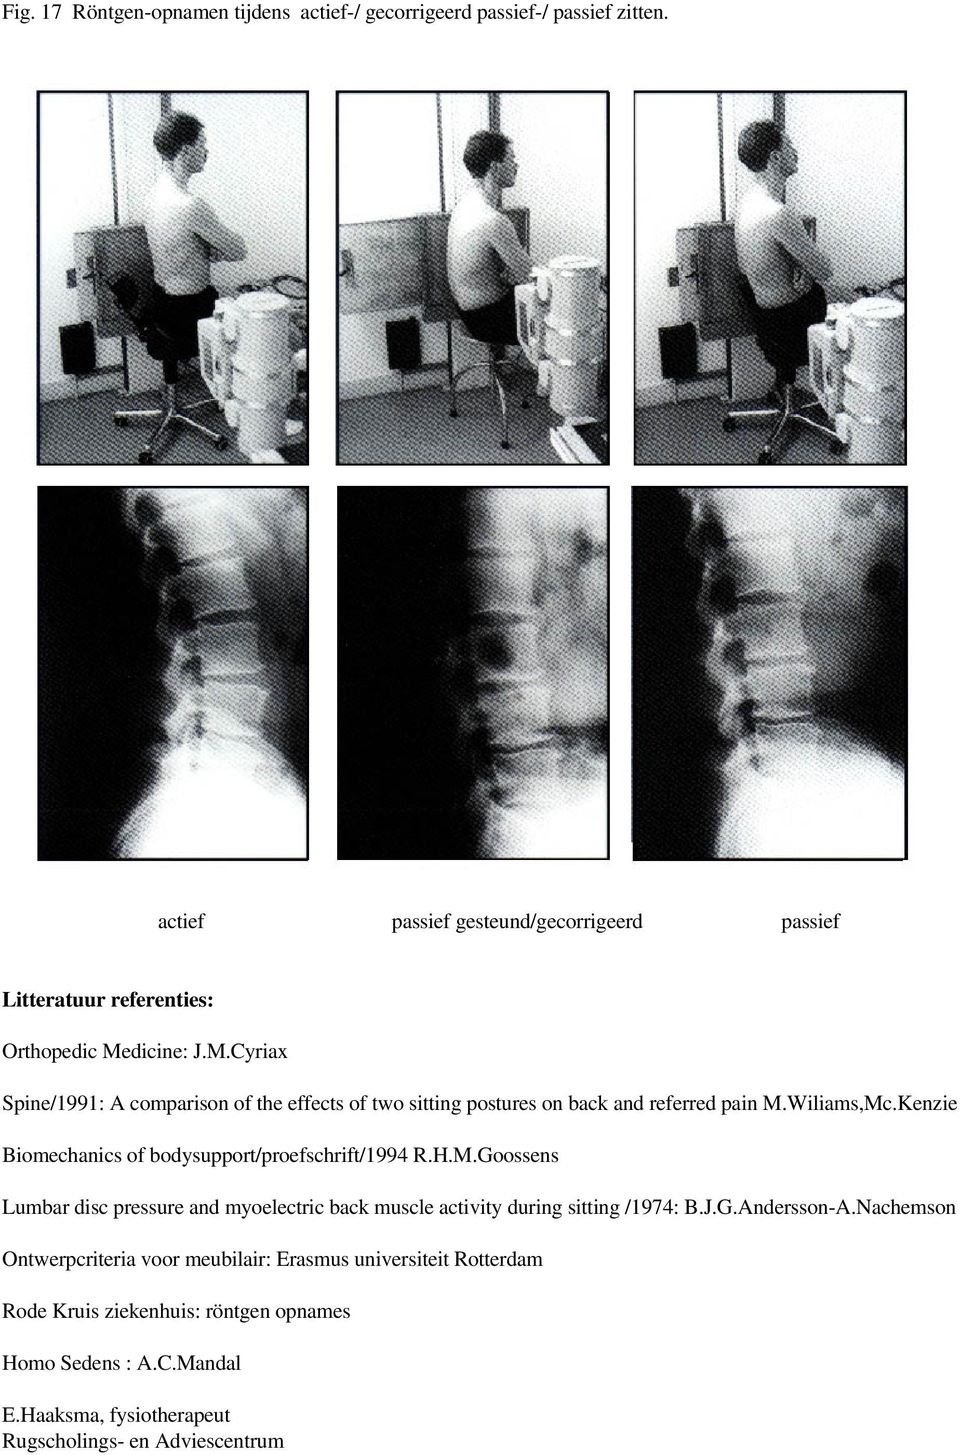 dicine: J.M.Cyriax Spine/1991: A comparison of the effects of two sitting postures on back and referred pain M.Wiliams,Mc.